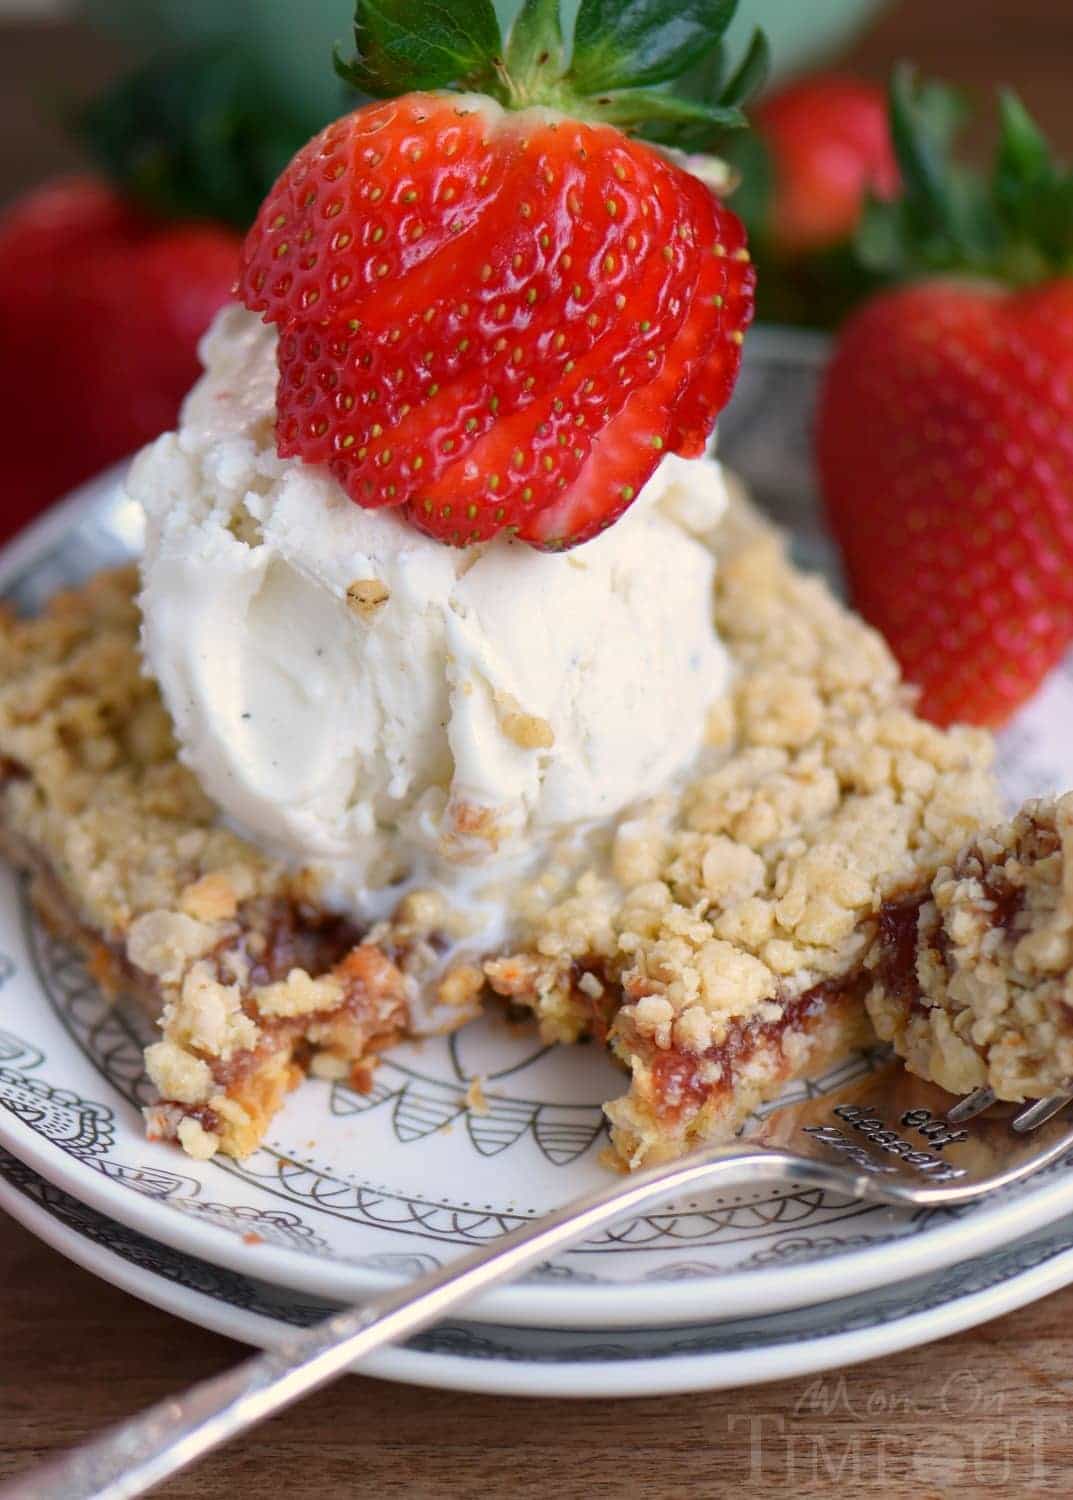 Dessert has never been easier or more delicious than with these 4 Ingredient Strawberry Oat Crumb Bars! Serve warm with ice cream for an exceptionally delicious treat! // Mom On Timeout